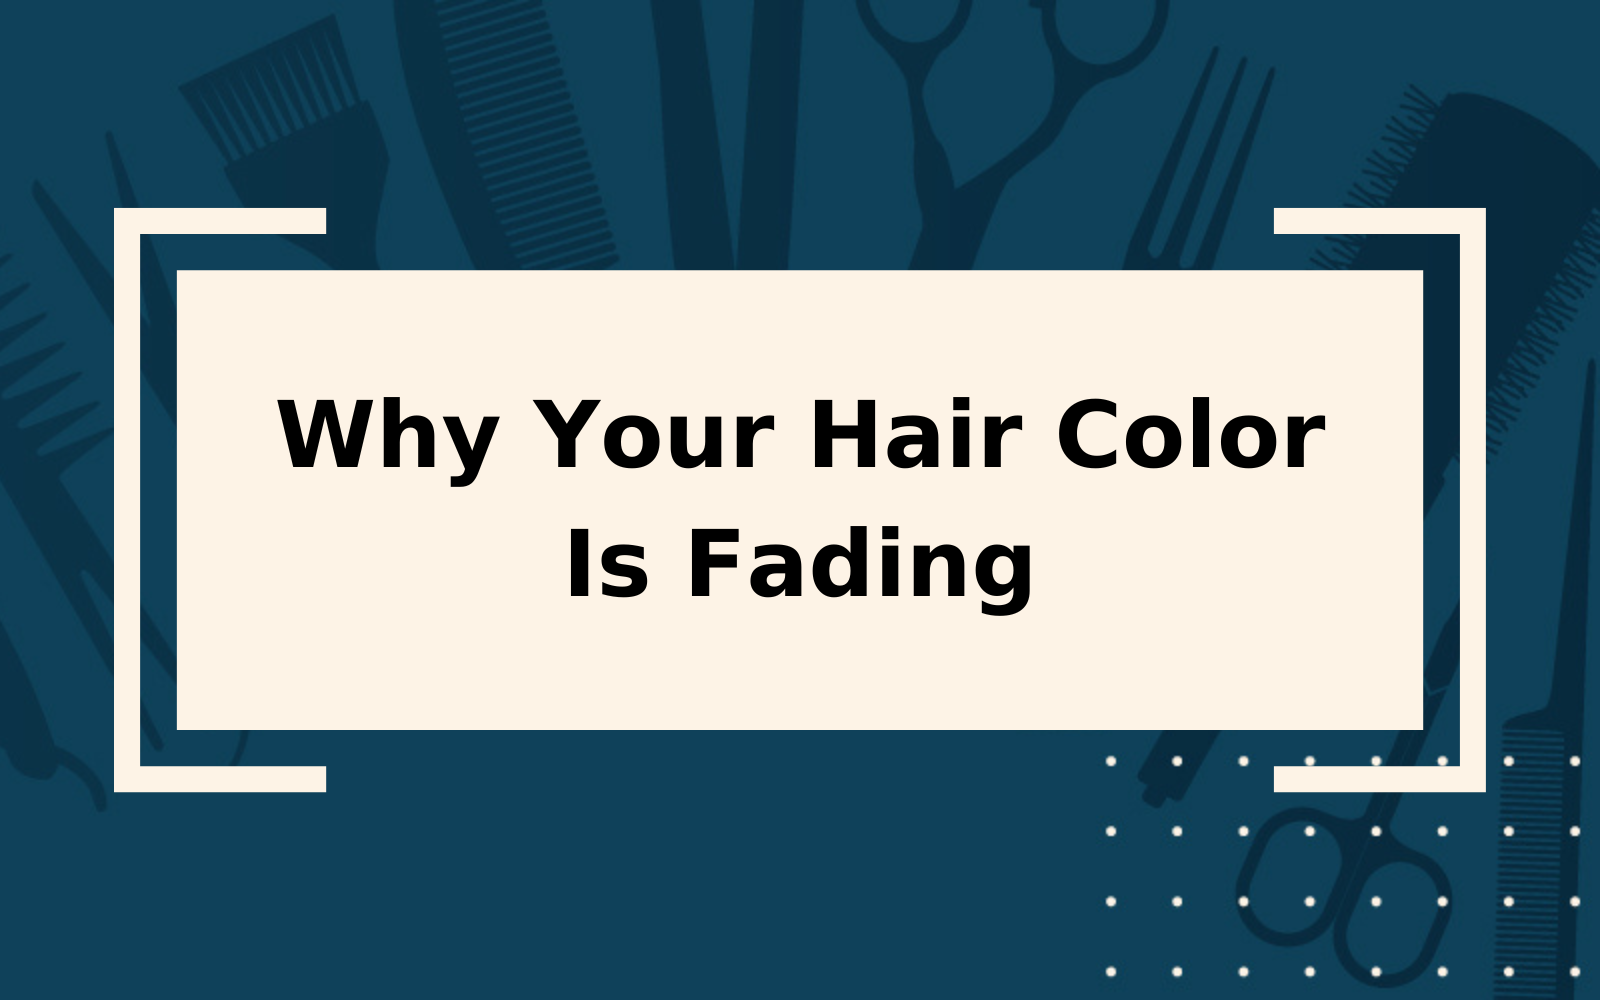 Hair Color Fading | 9 Reasons Why It Happens